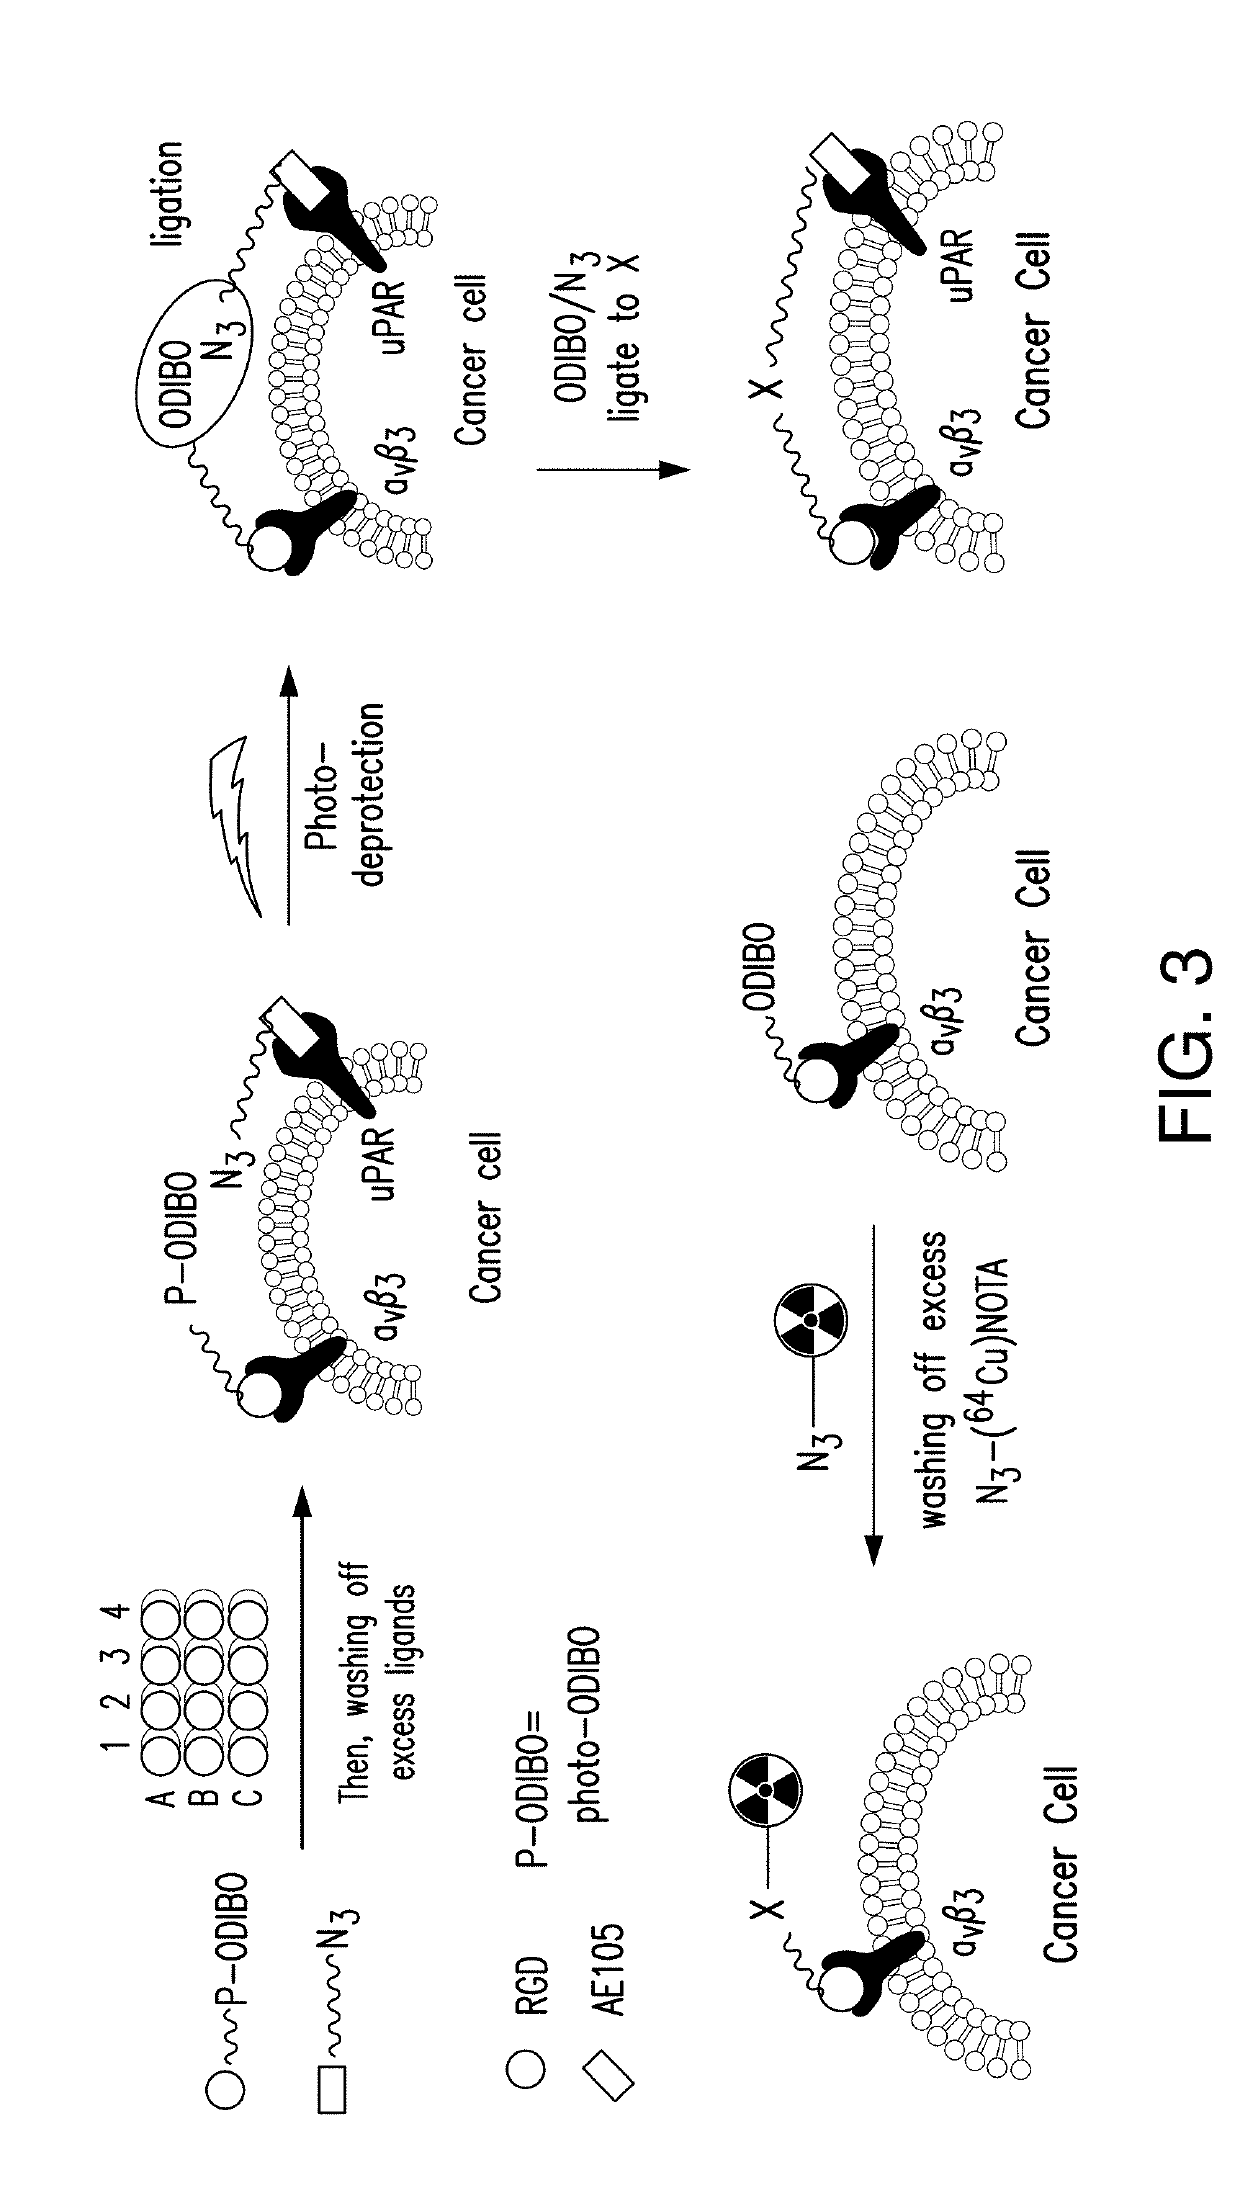 Dimerization strategies and compounds for molecular imaging and/or radioimmunotherapy